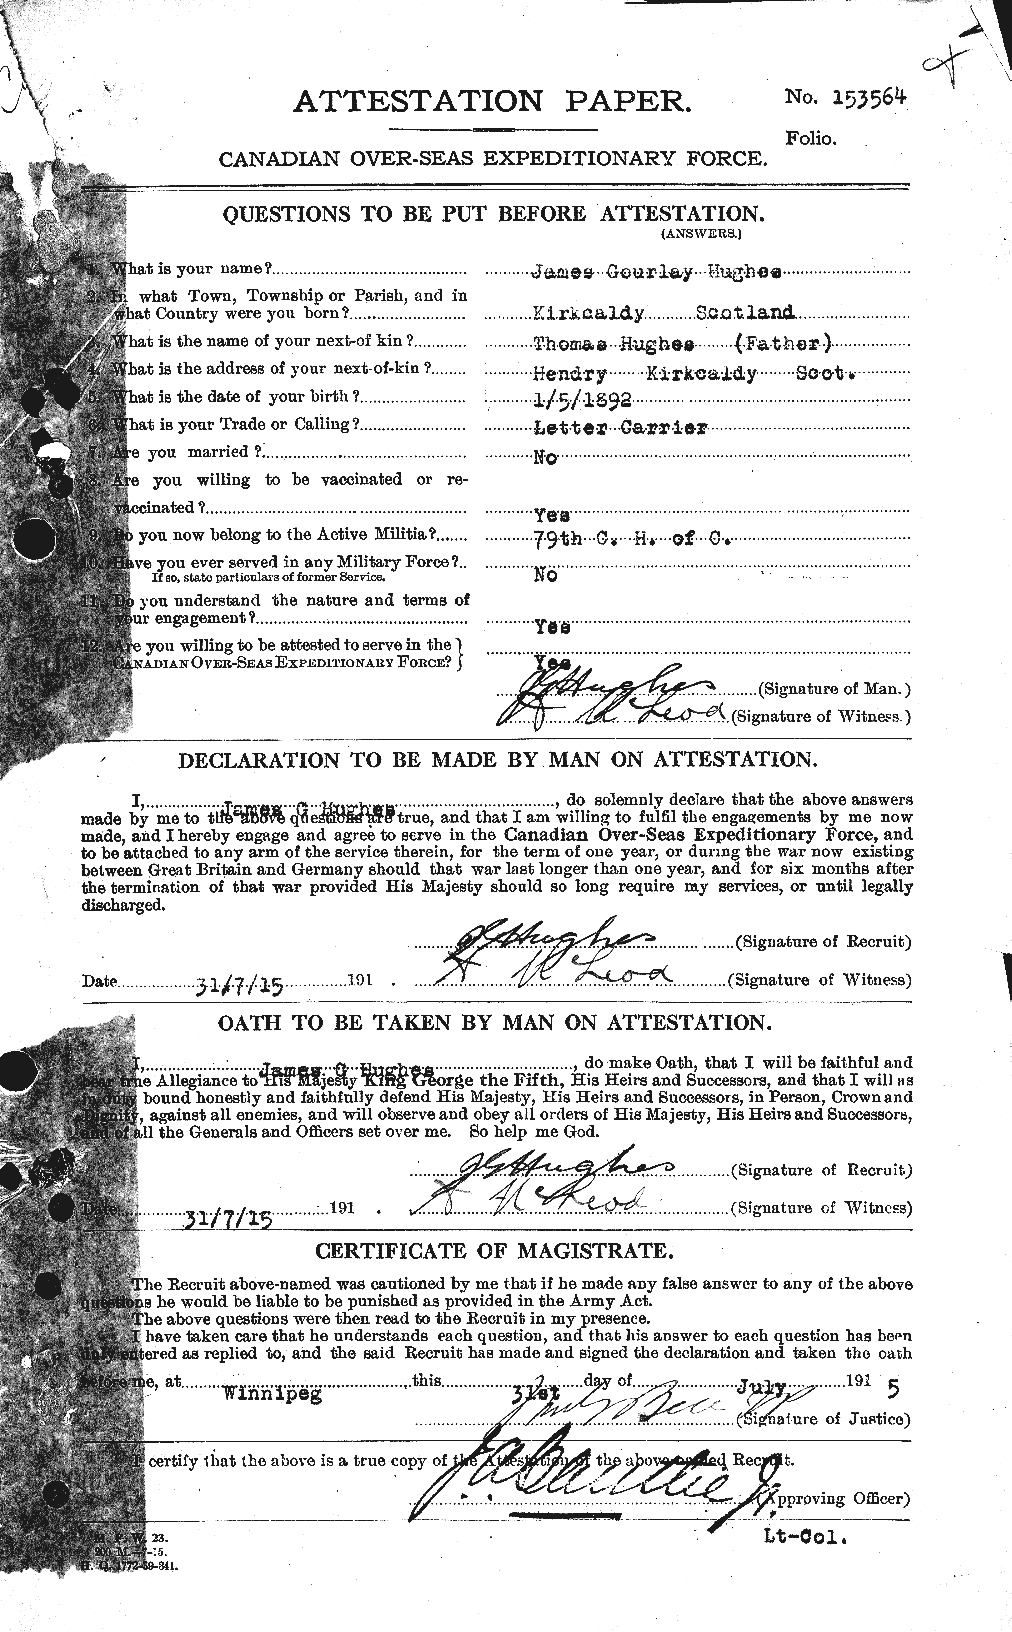 Personnel Records of the First World War - CEF 403962a